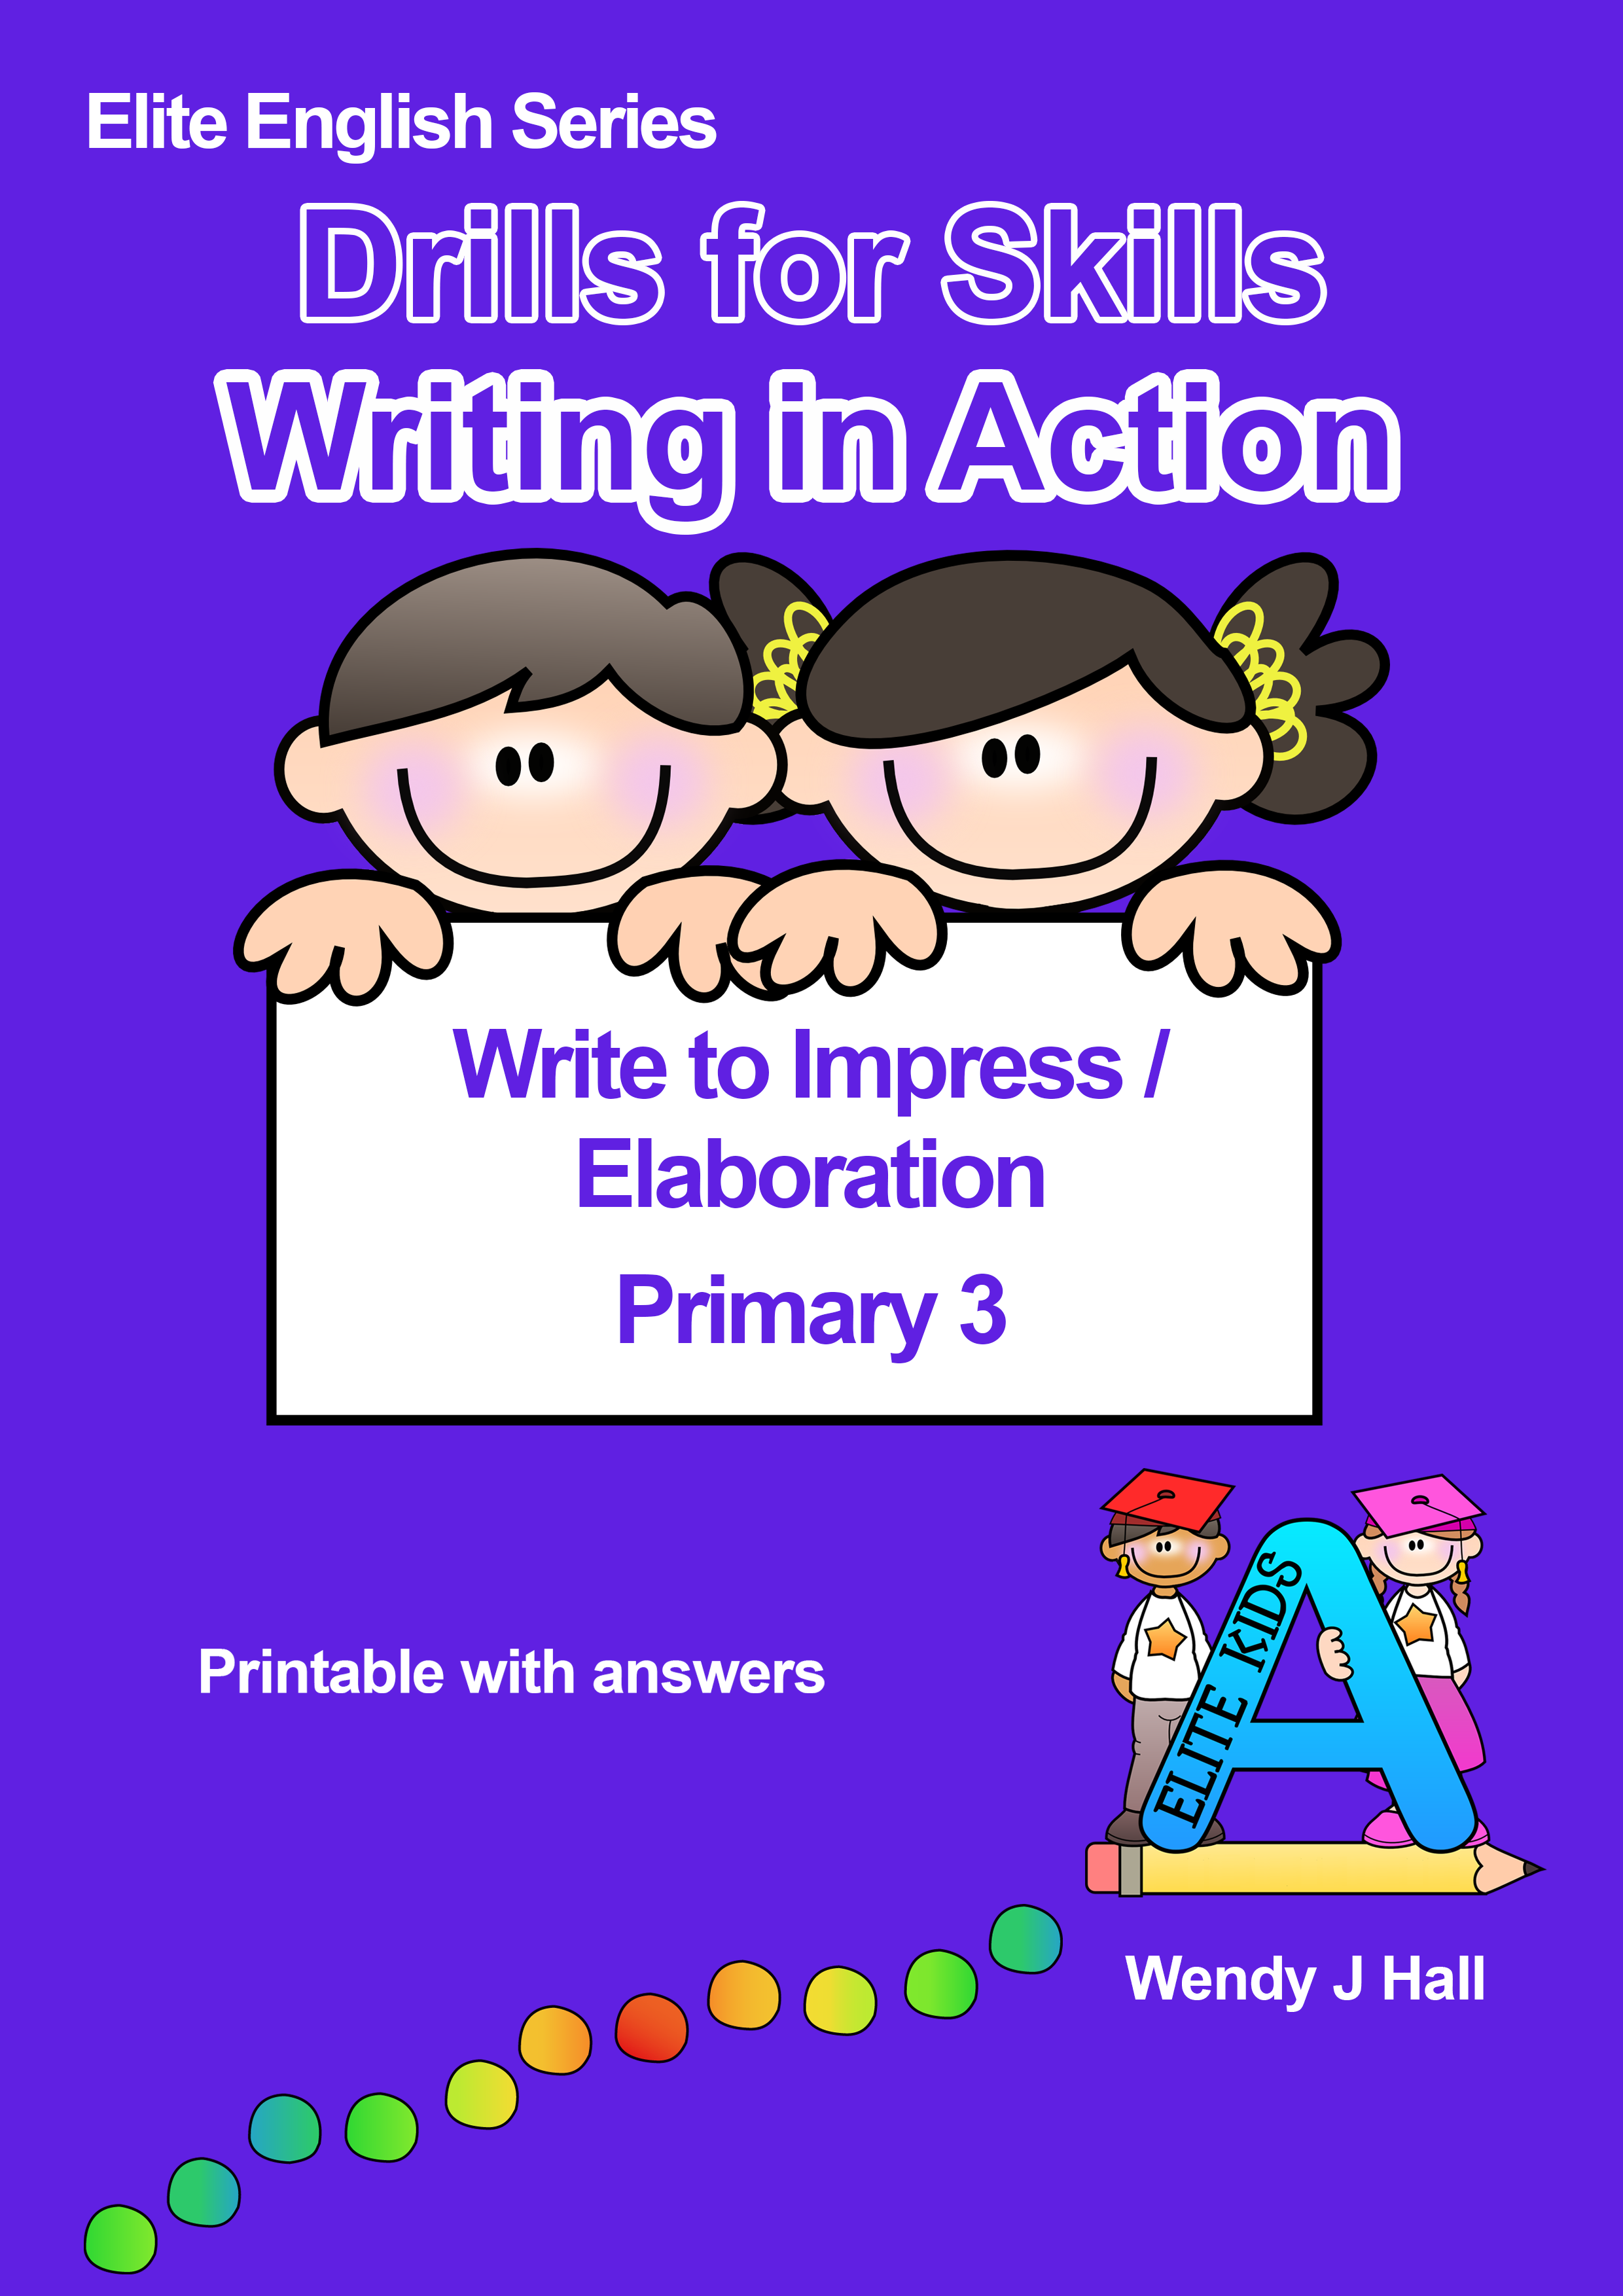 Drills for Skills - Writing in Action | Primary 3